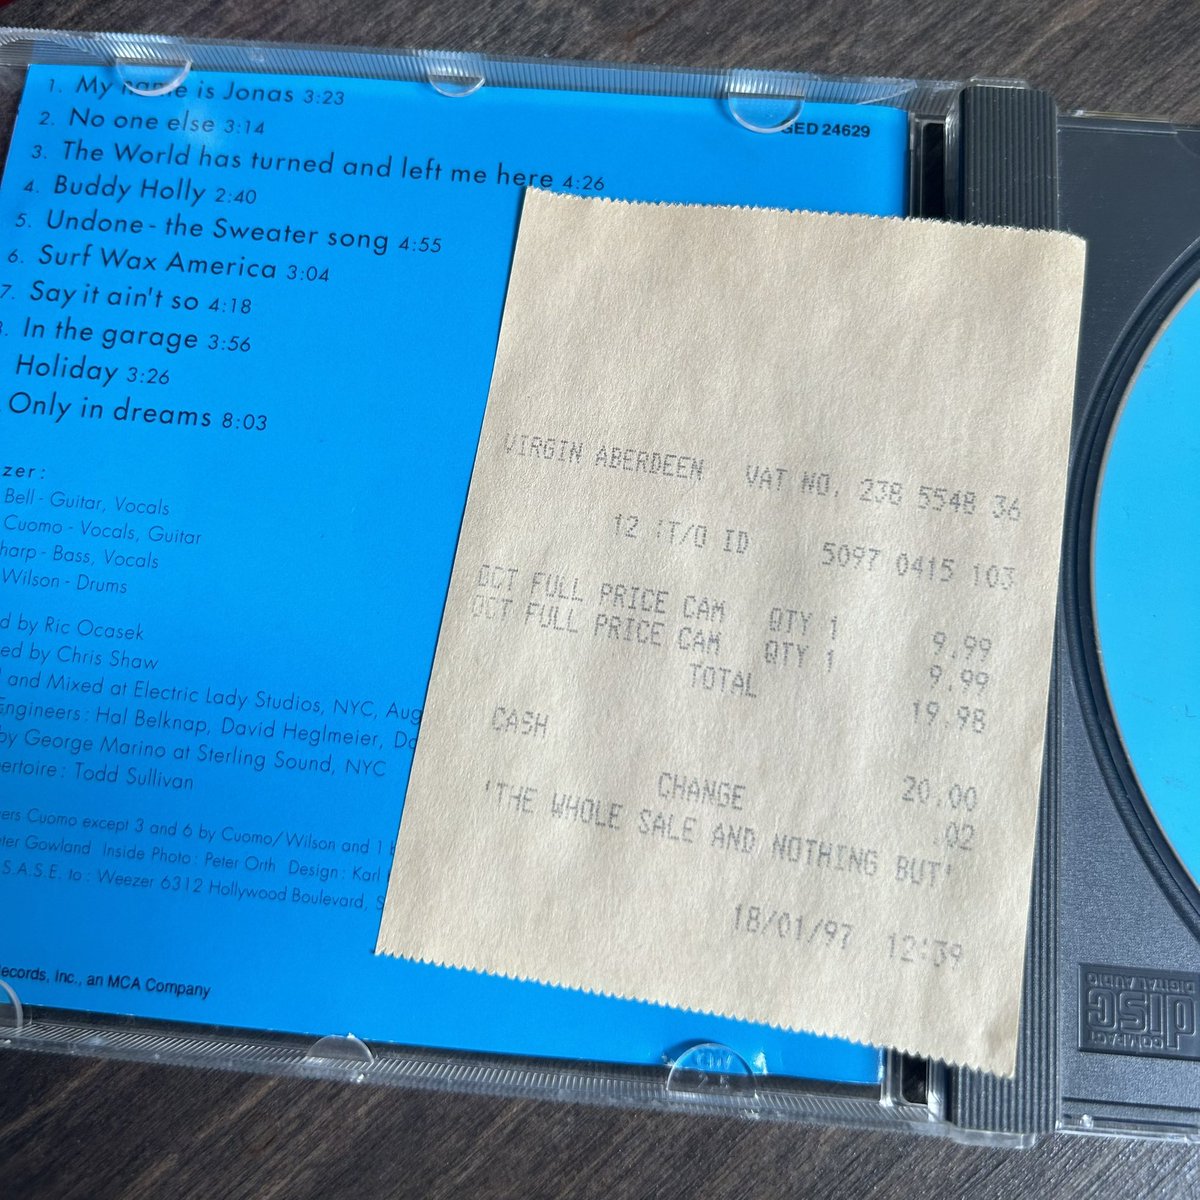 Lots of posts about @Weezer #BlueAlbum turning 30. Dug mine out and gave it a spin. Still sounds awesome Found the receipt in the box - Jan 1997? Maybe I was late to the party (or more likely teenage me had a cassette bootleg for a while 🤘)!